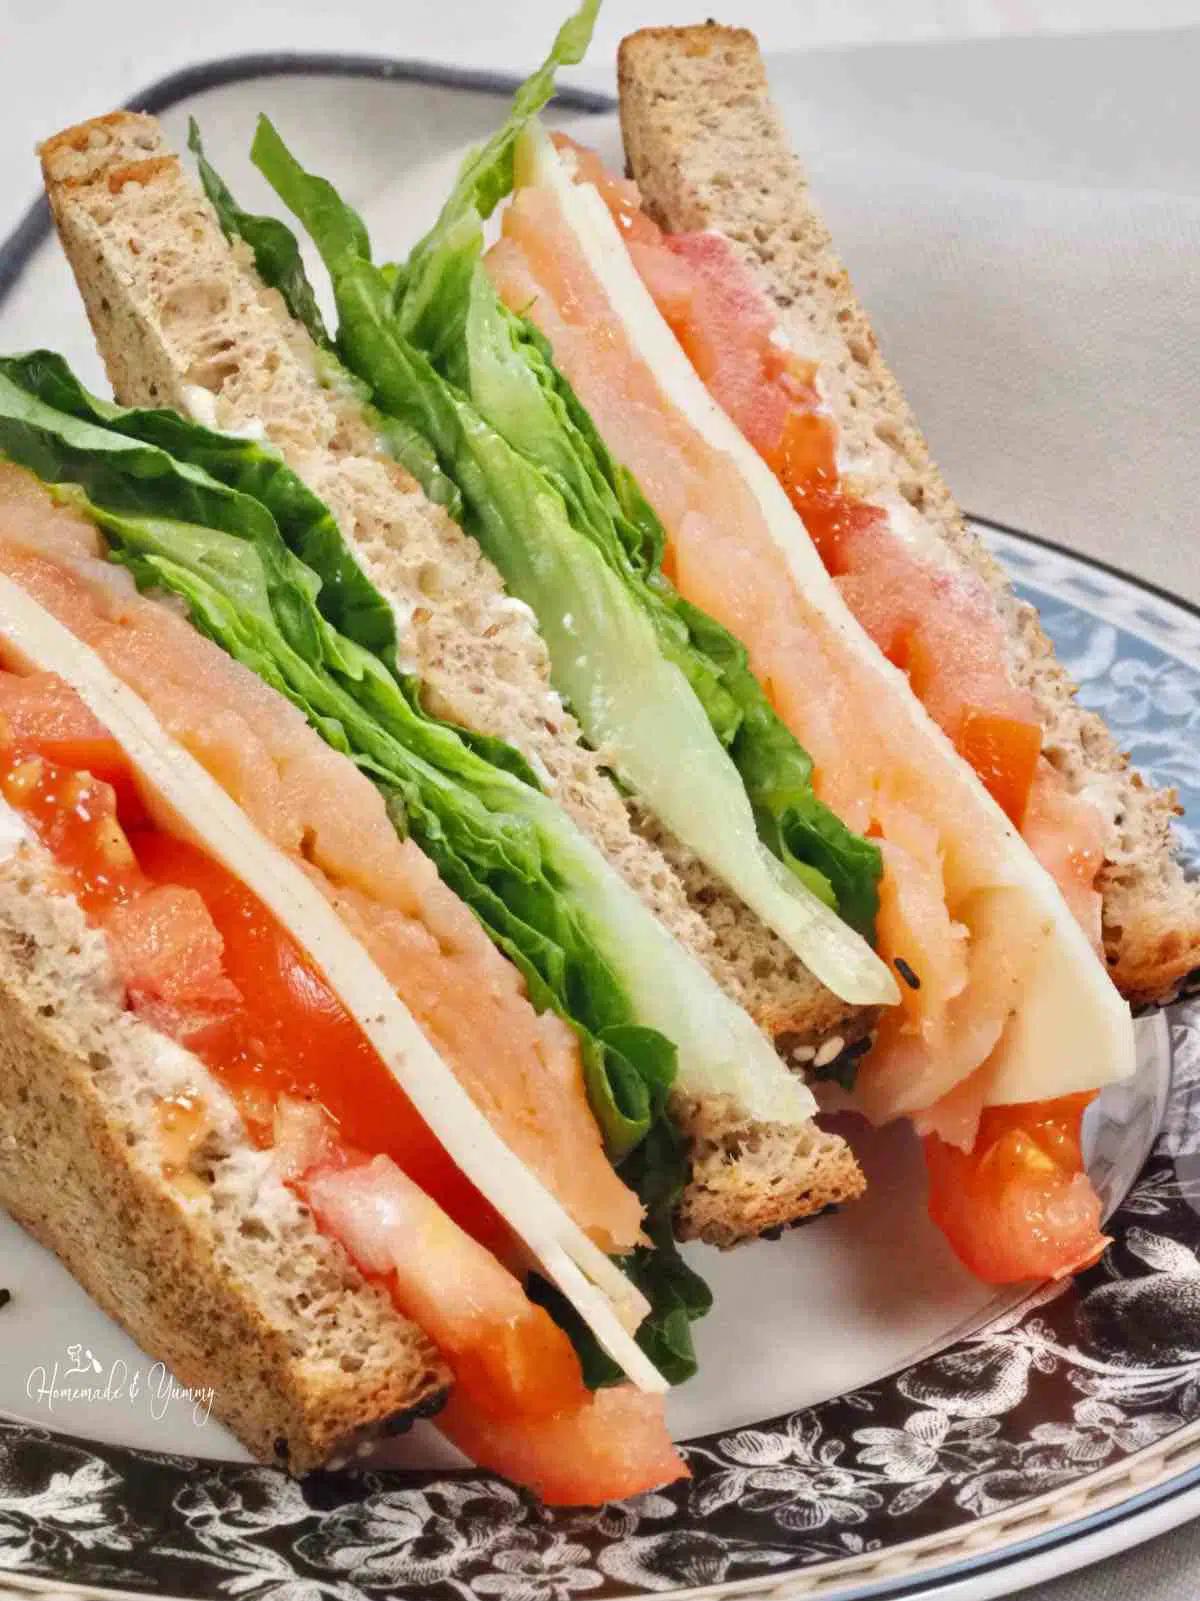 best bread for smoked salmon - How do the French eat smoked salmon